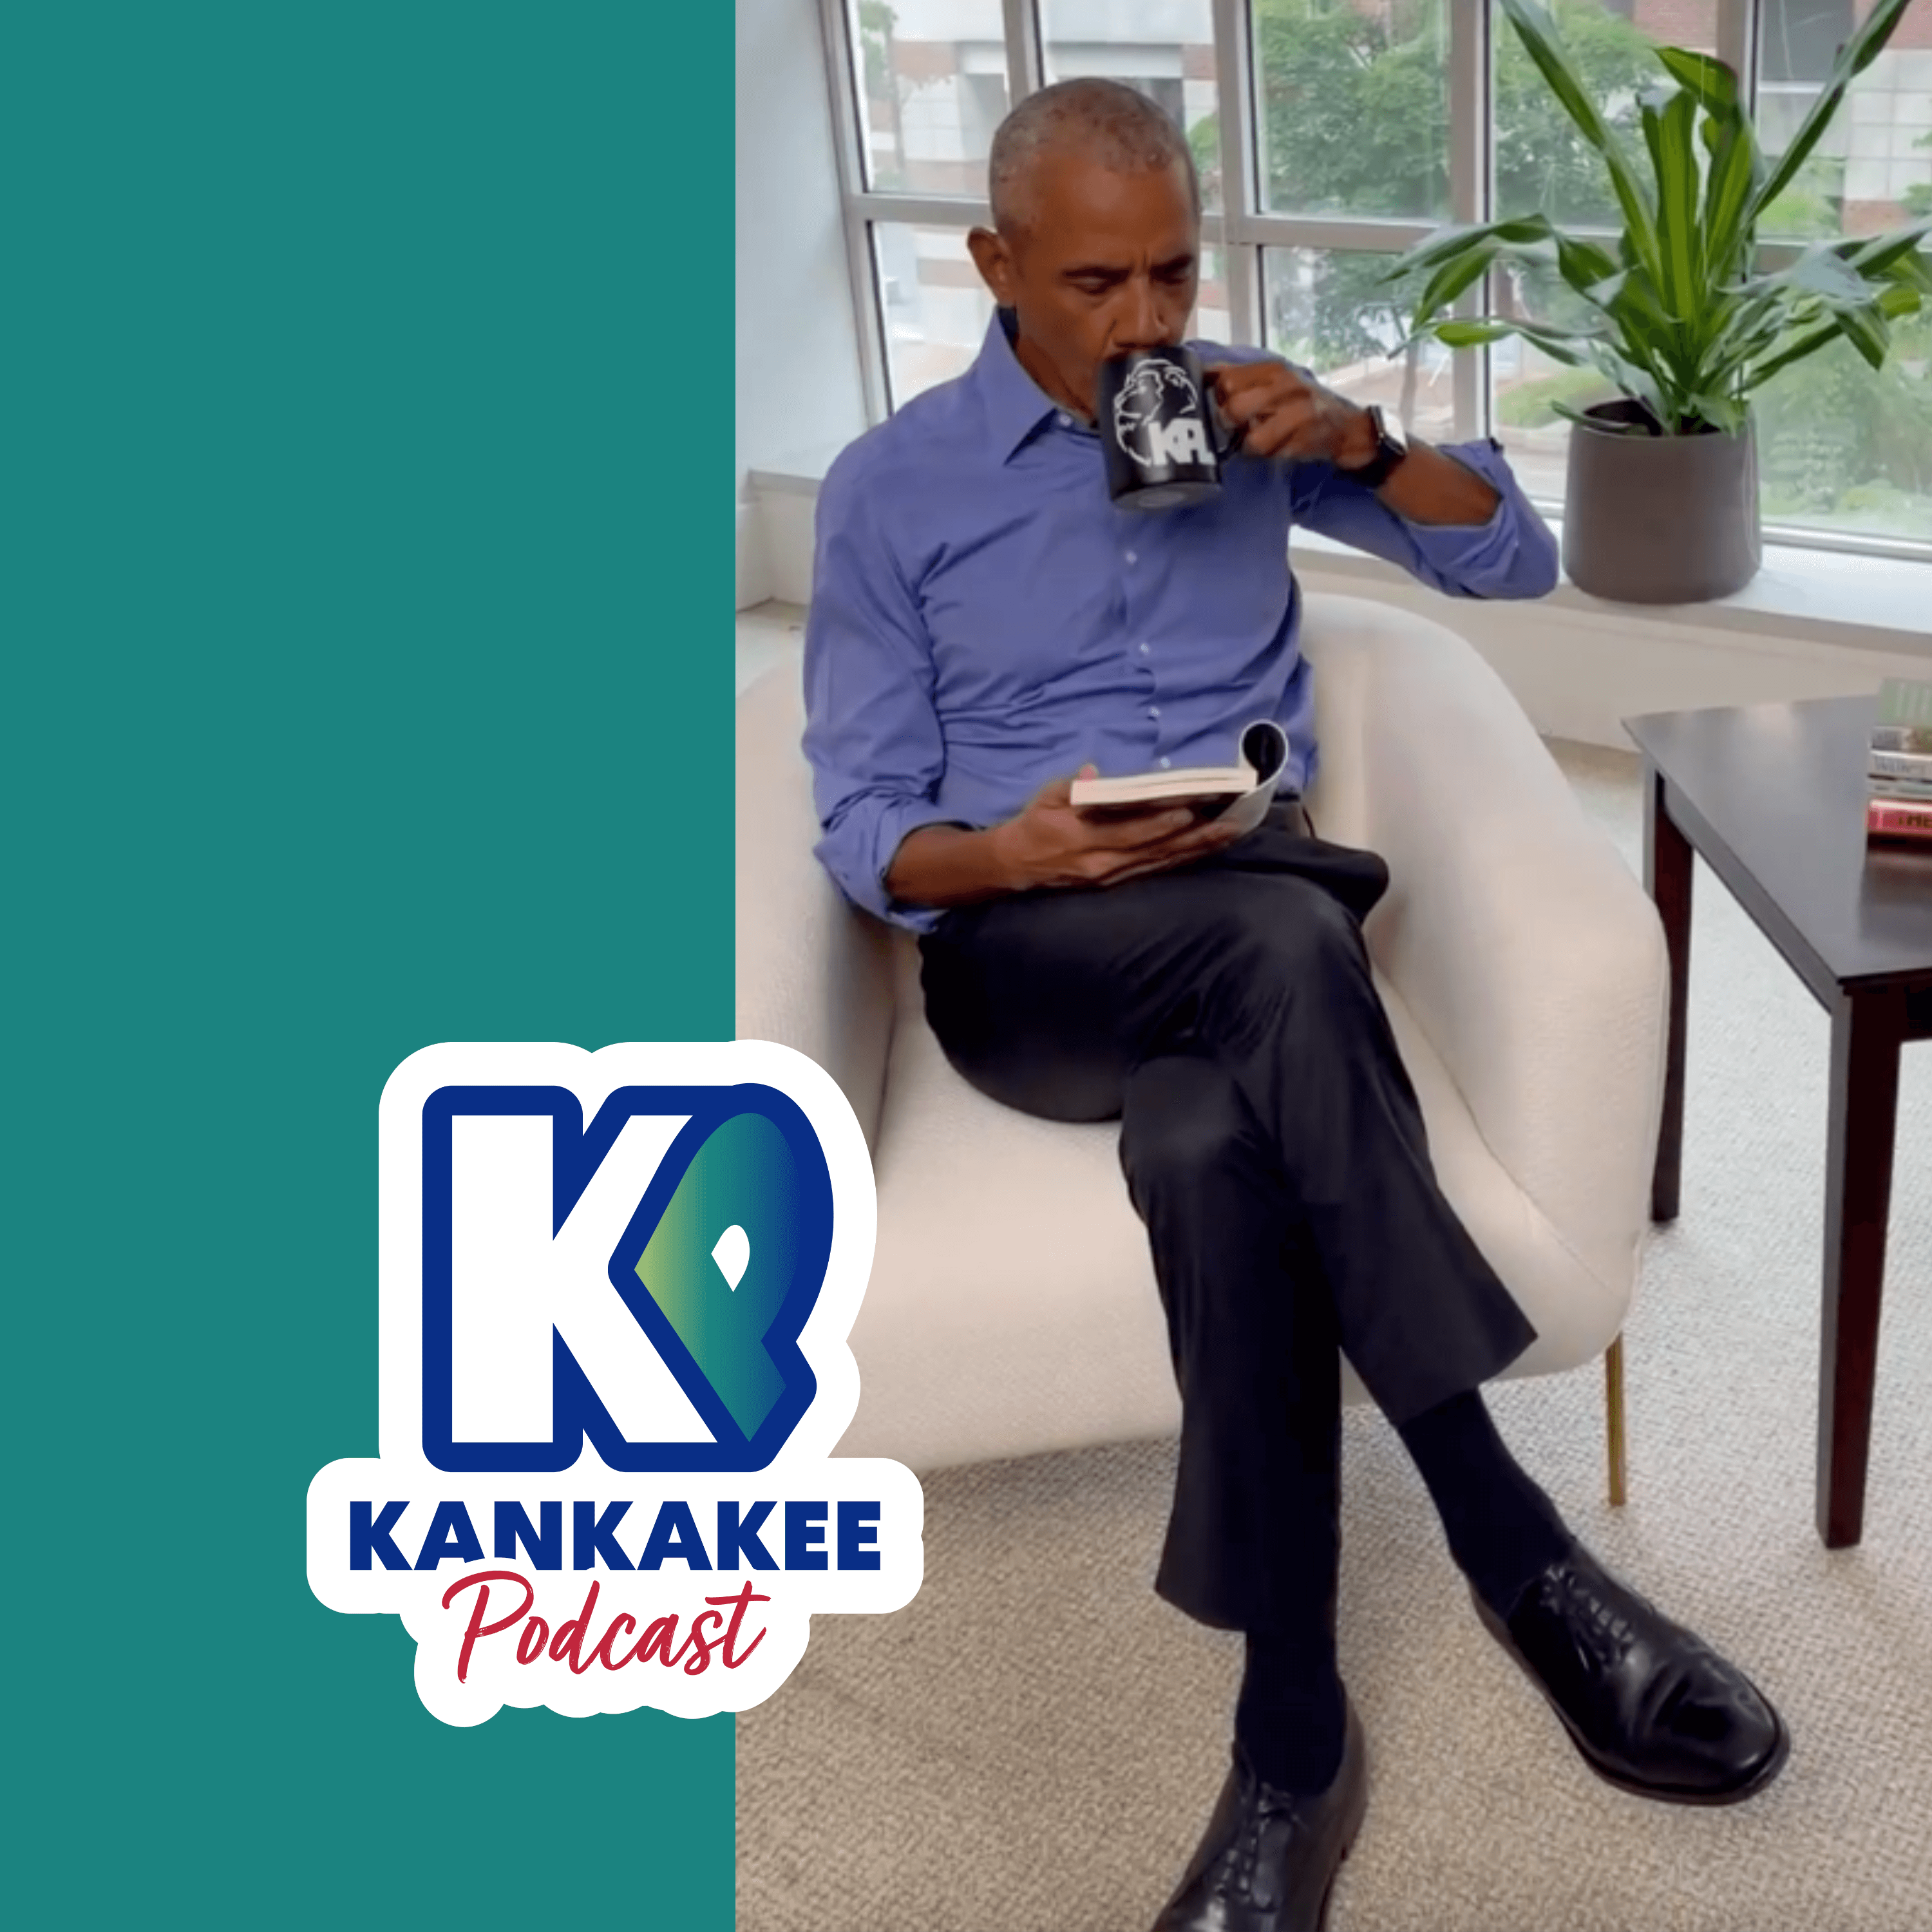 #111: Barack Obama’s Support for the Kankakee Public Library